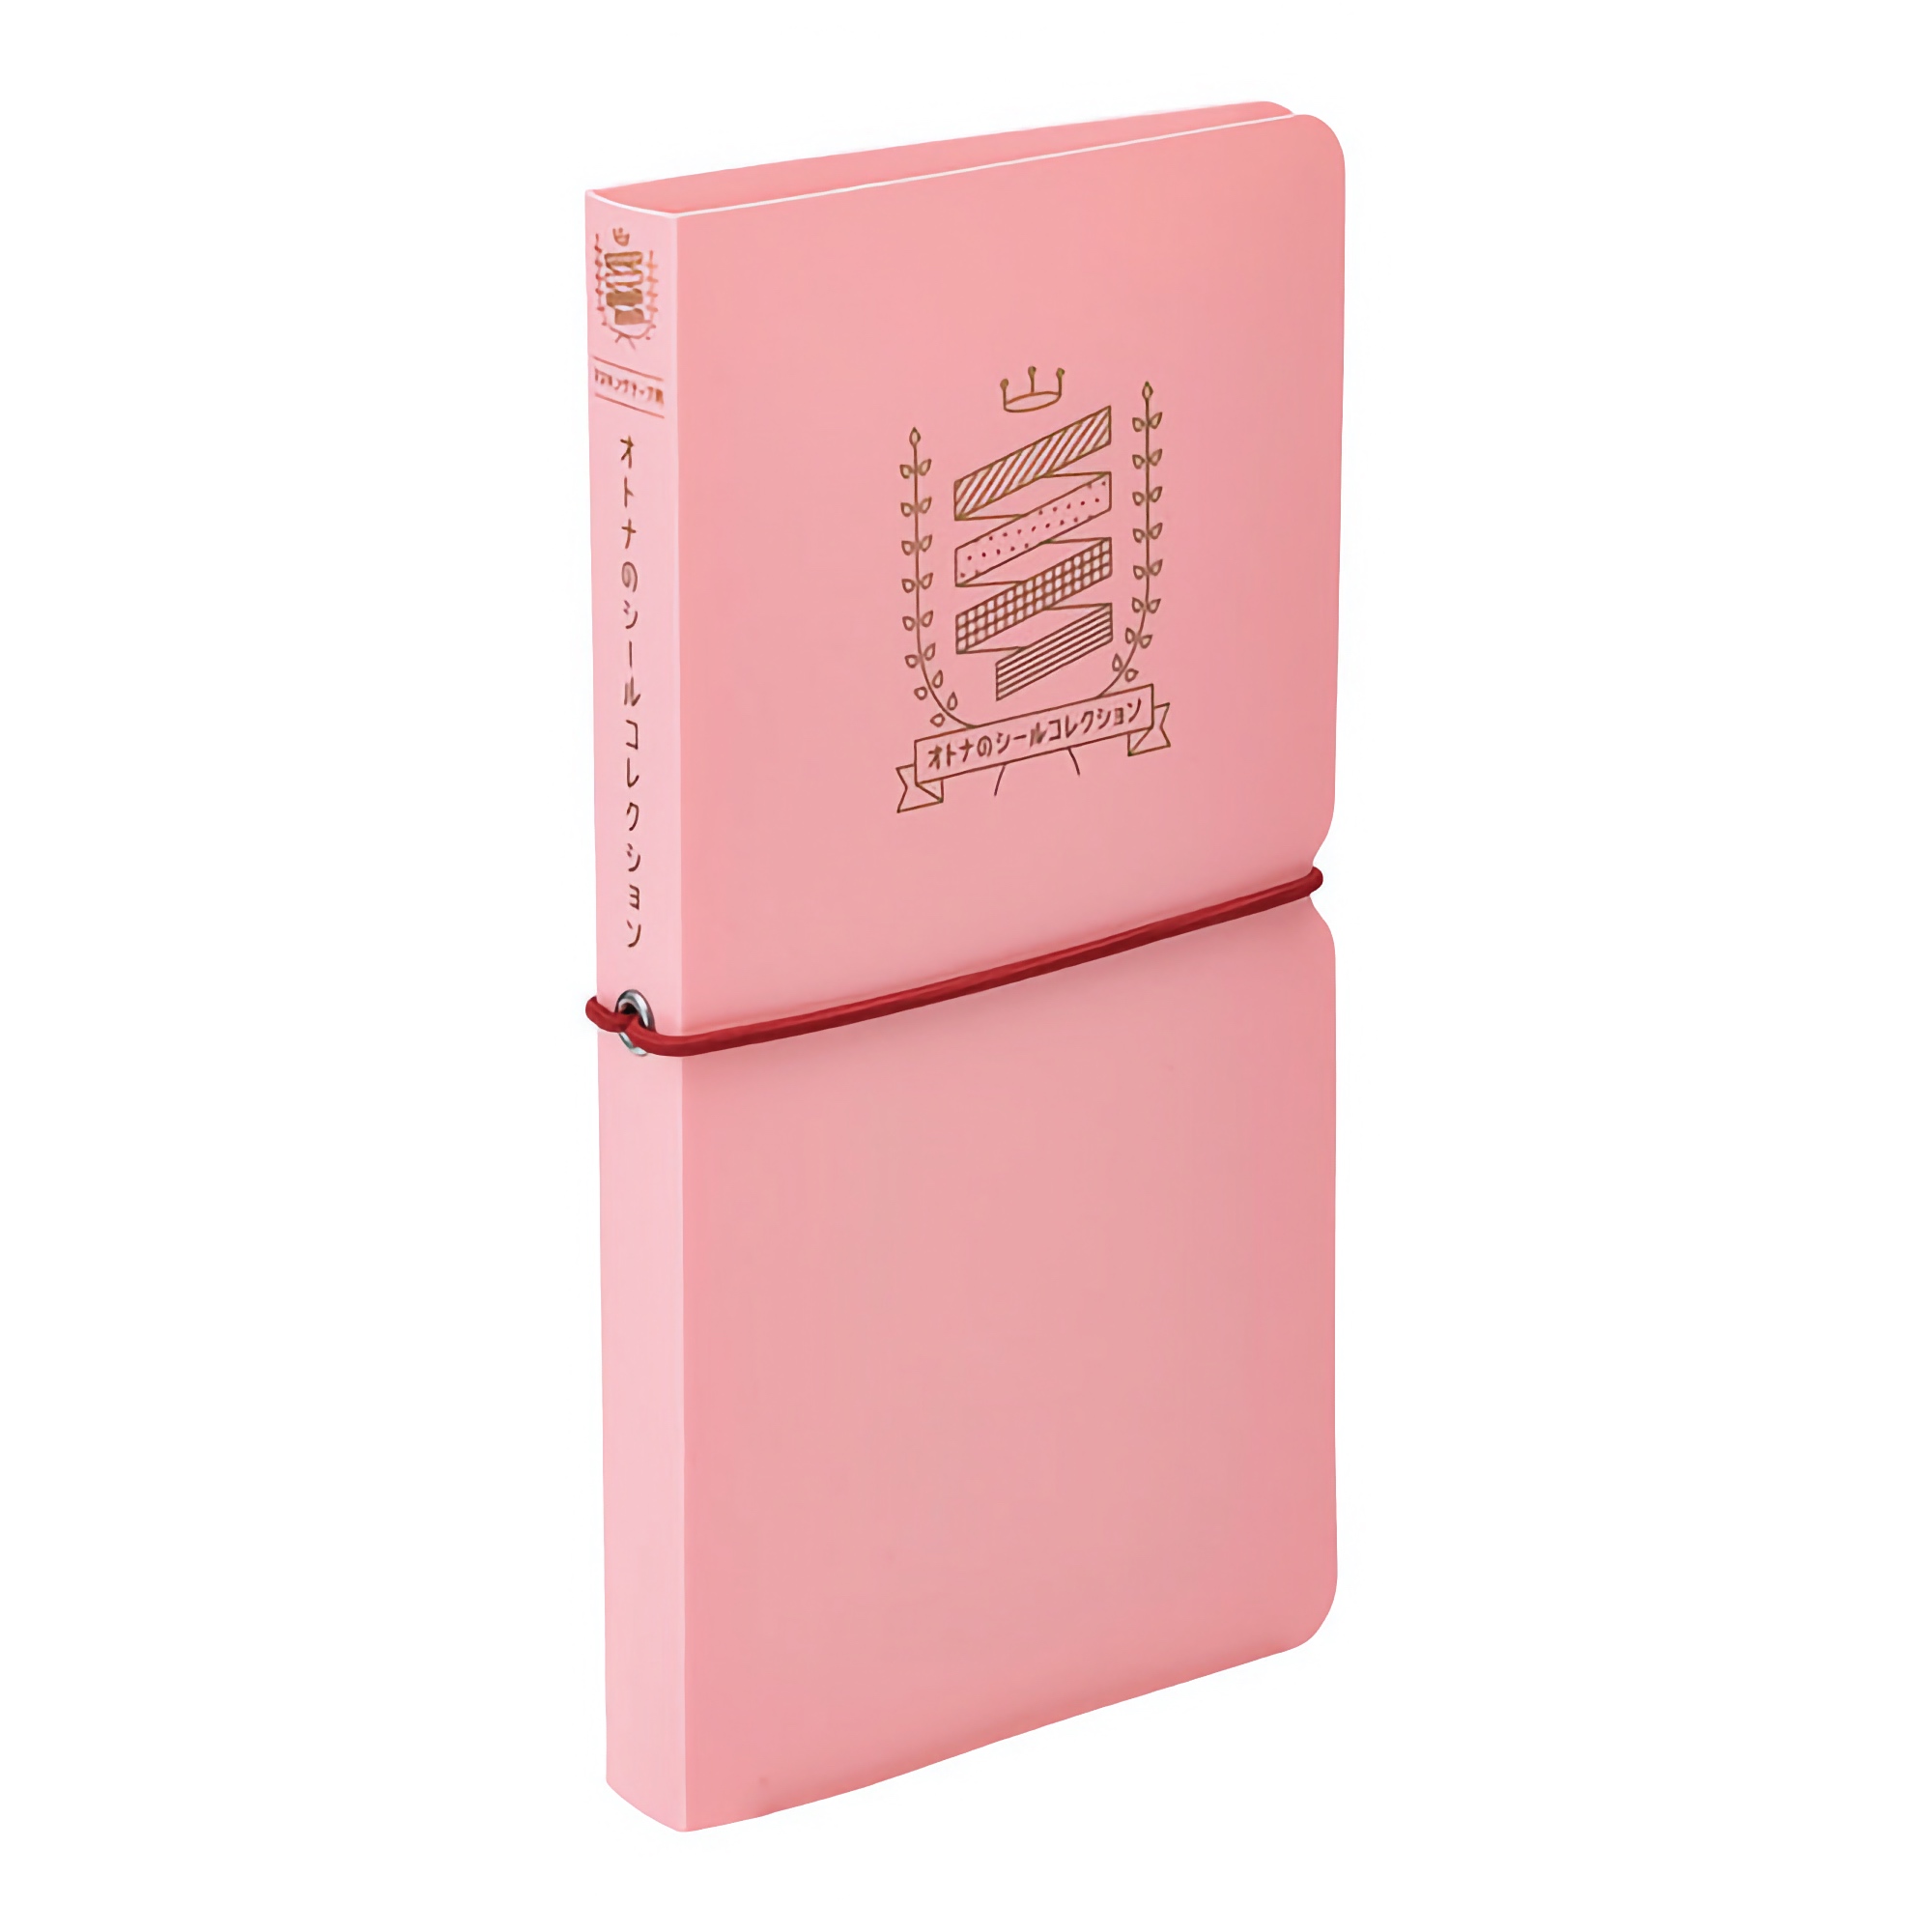 King Jim Seal Collection Book for Washi Tape Salmon Pink